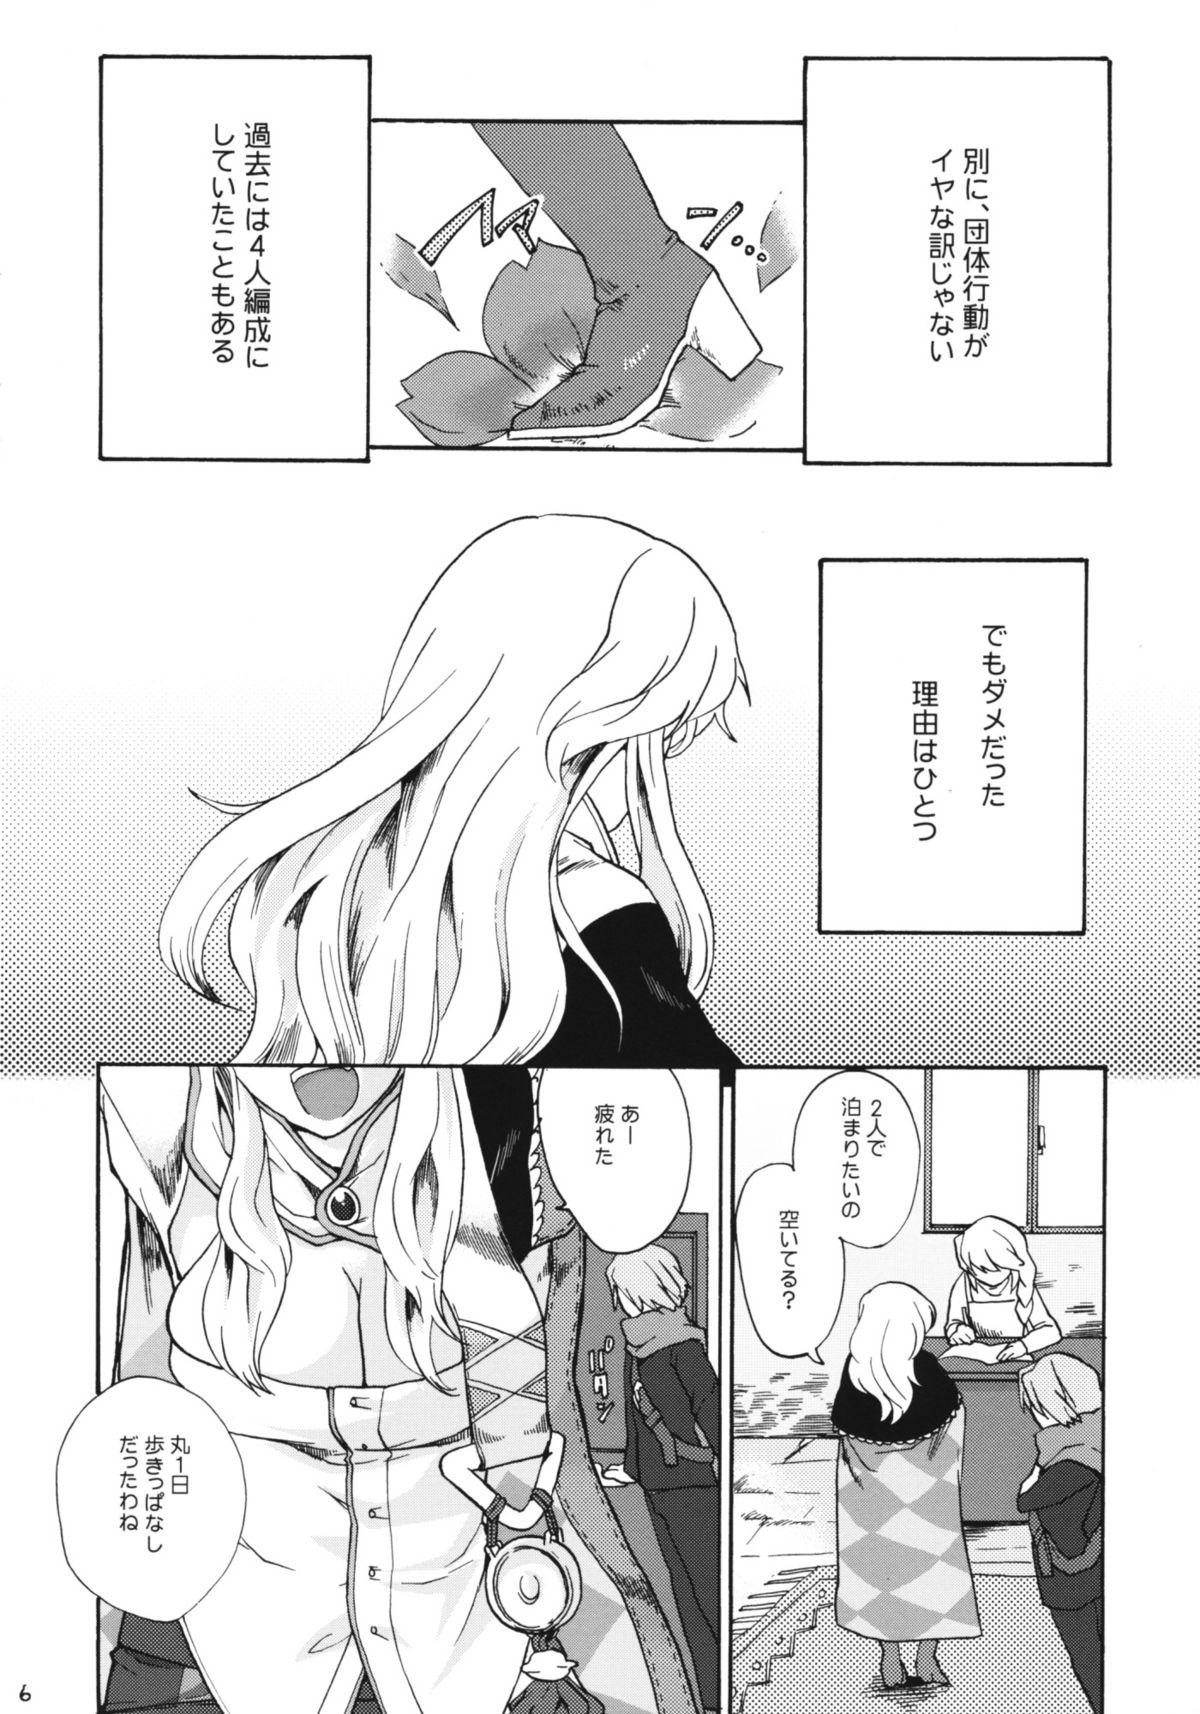 Hugetits In You And Me - 7th dragon Tgirls - Page 5